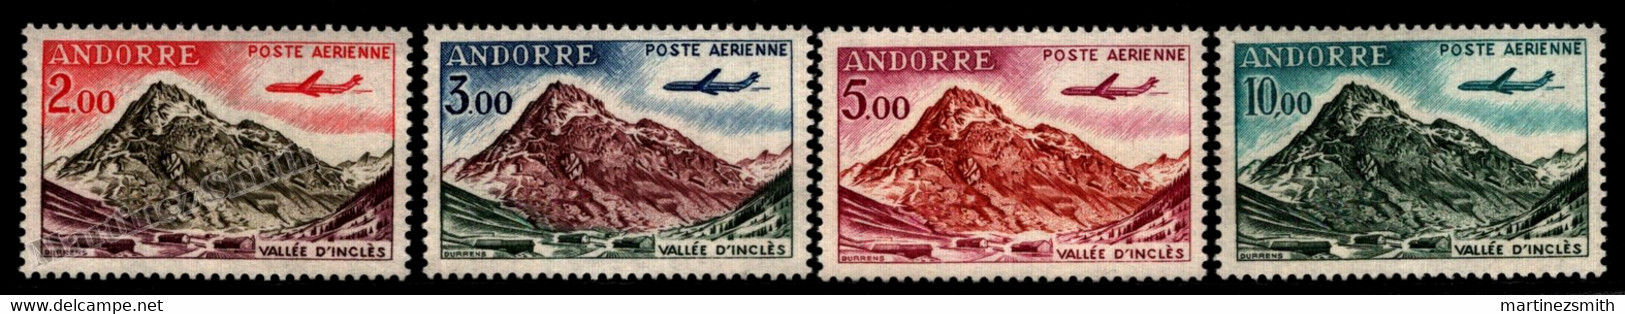 Andorre Français / French Andorra 1961 Airmail Yv. Inclès Valley, Soldeu, - MNH - Airmail